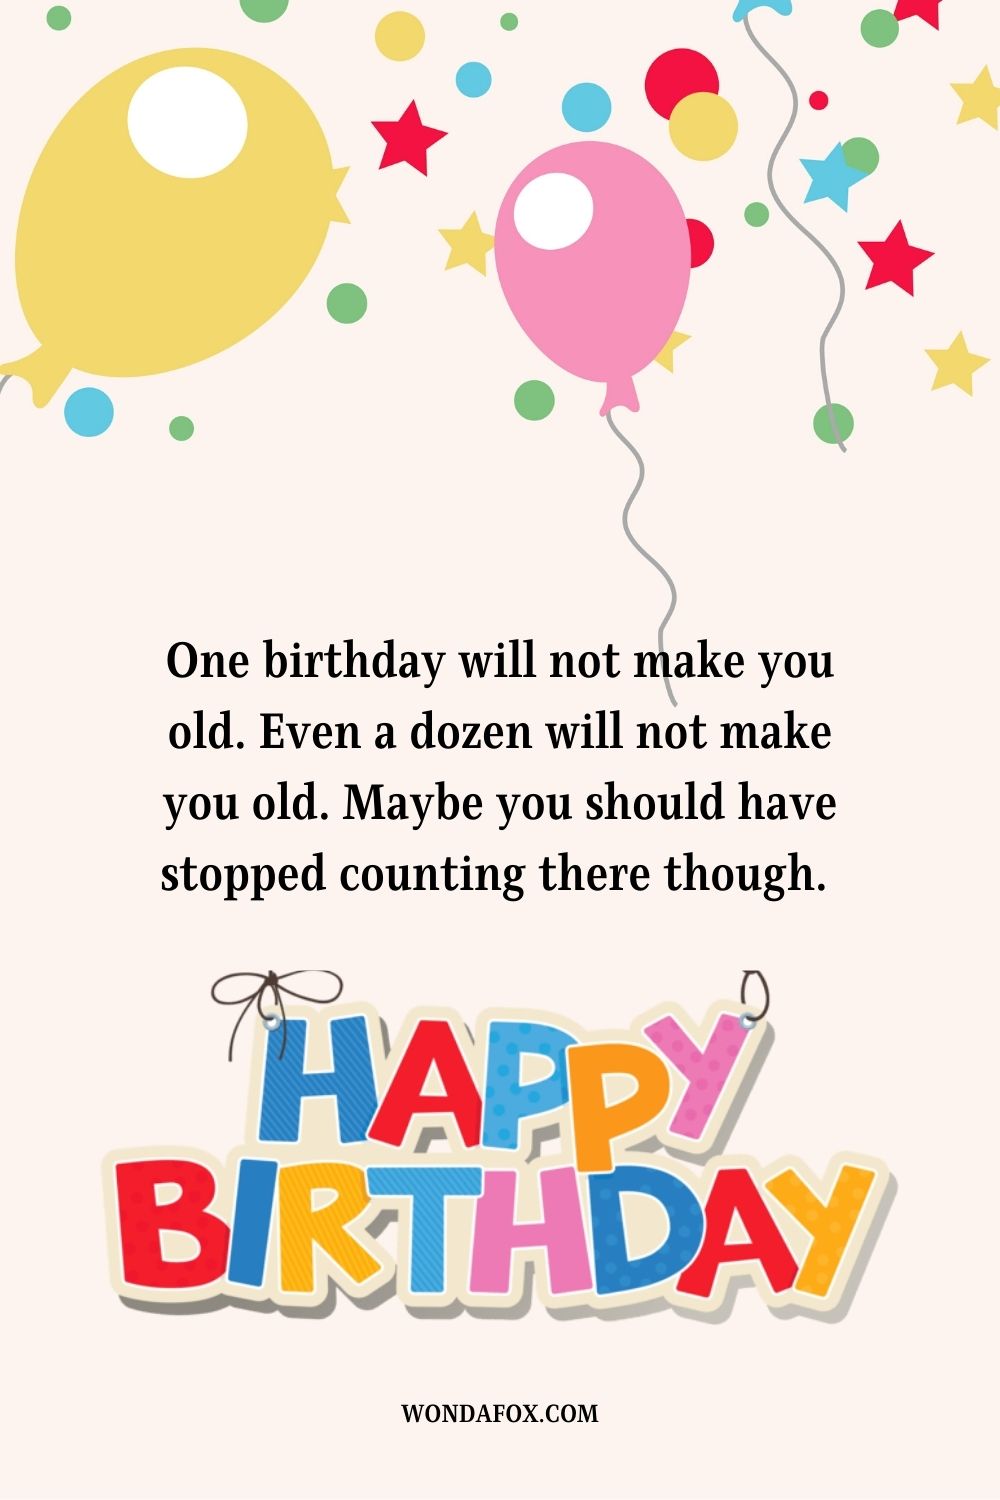 One birthday will not make you old. Even a dozen will not make you old. Maybe you should have stopped counting there though. Happy birthday, again.